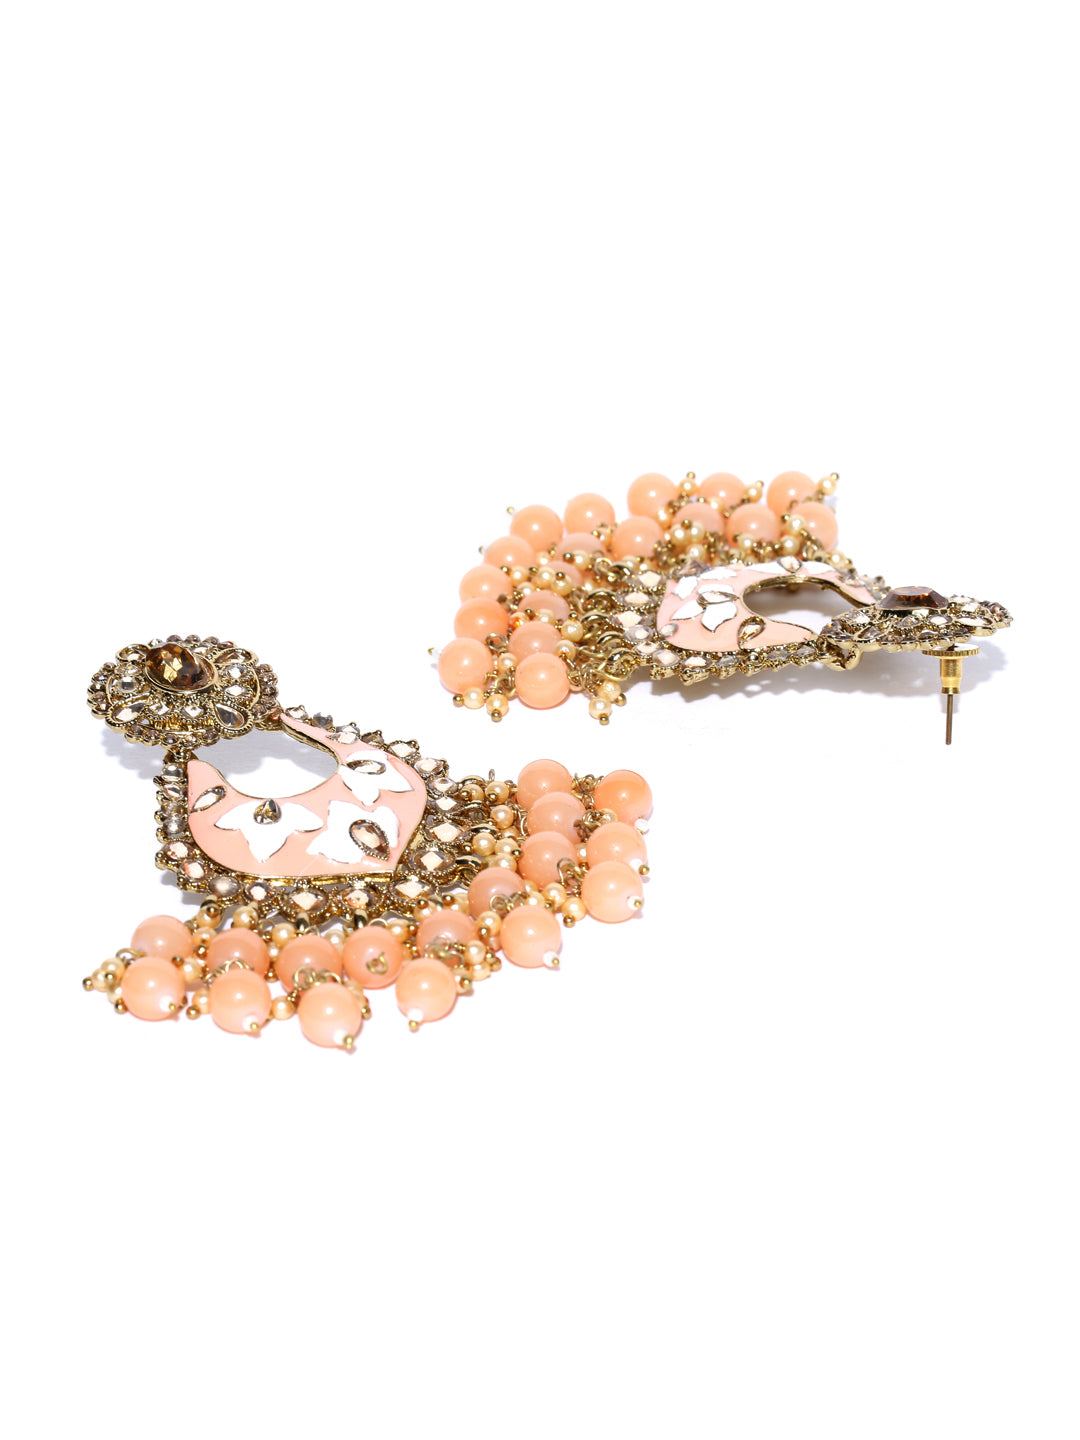 Gold-Plated Stones Studded Drop Earrings with Meenakari work and Beads Drop in Peach Color